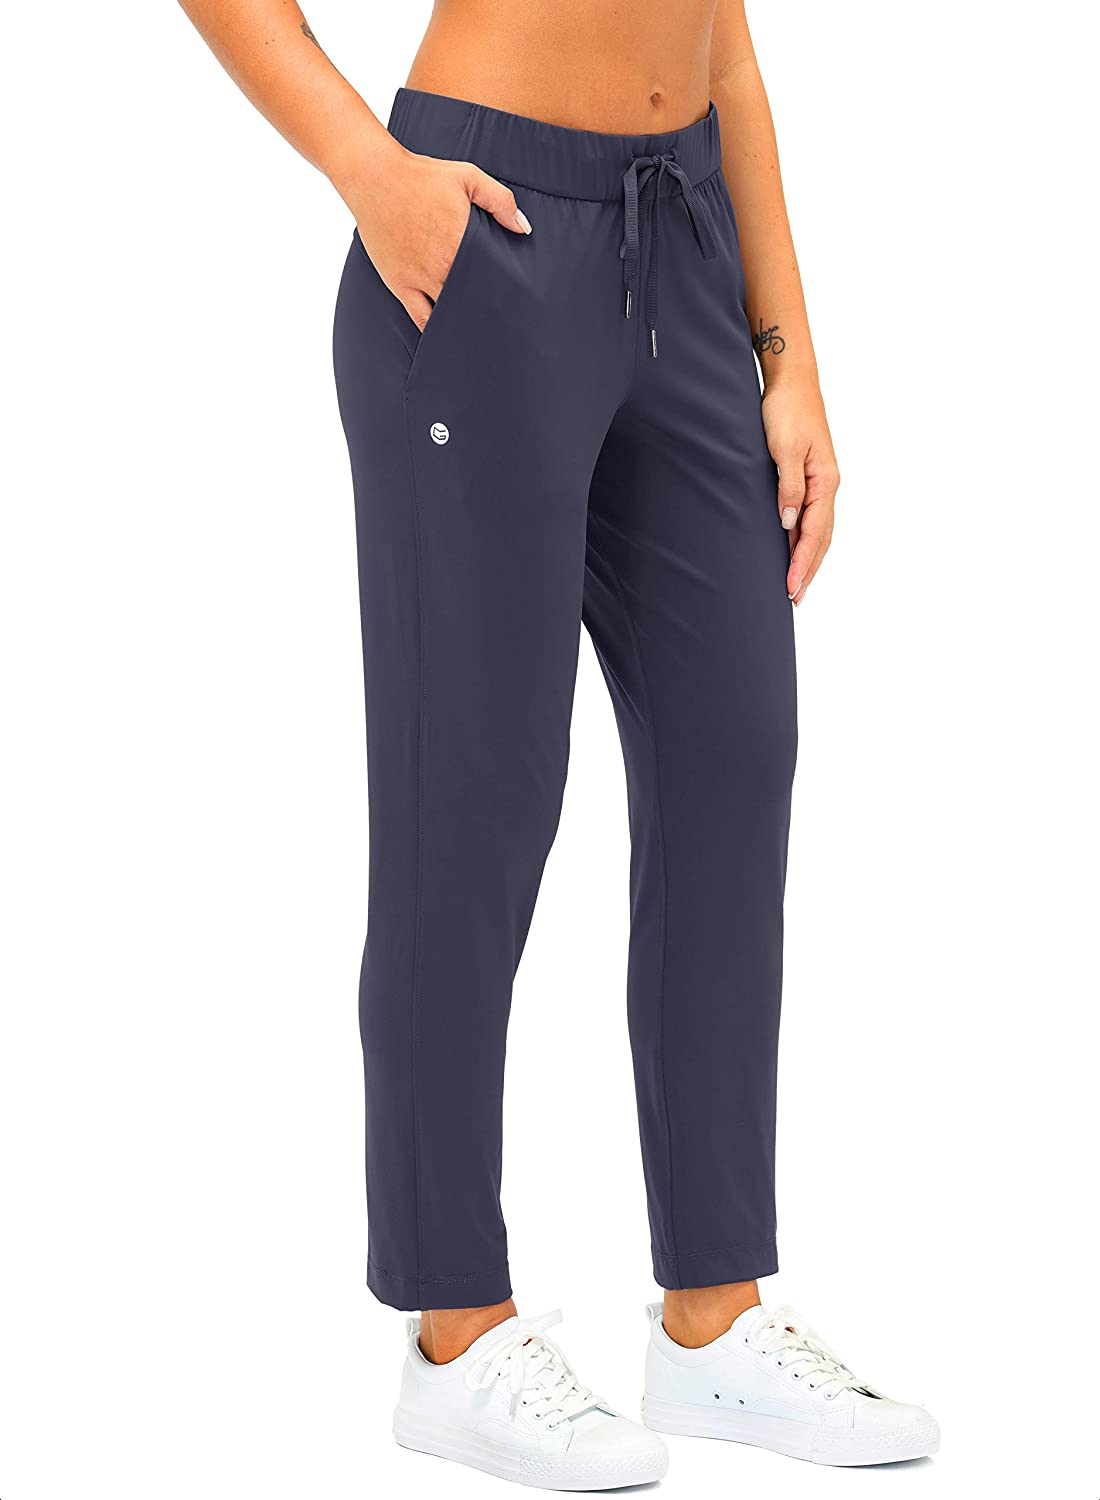 G Gradual Women's Pants with Deep Pockets 7/8 Stretch Sweatpants for ...